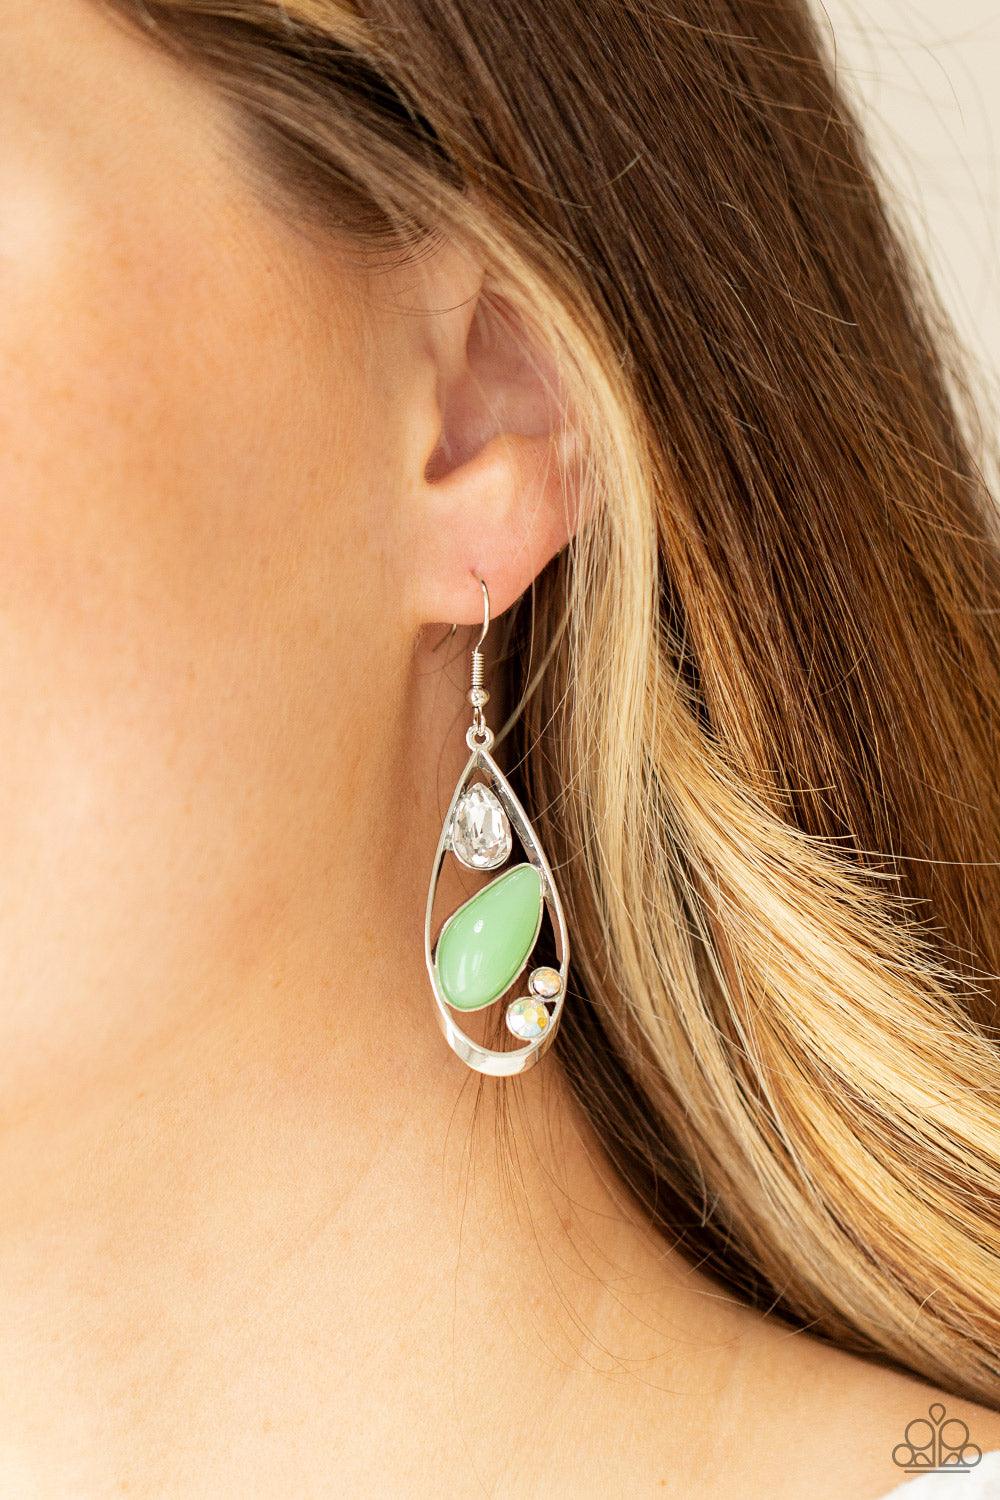 Paparazzi Accessories Harmonious Harbors - Green A silver teardrop frame embraces a collection of iridescent rhinestones and a milky Green Ash bead that is reminiscent of seashore finds. Earring attaches to a standard fishhook fitting. Sold as one pair of